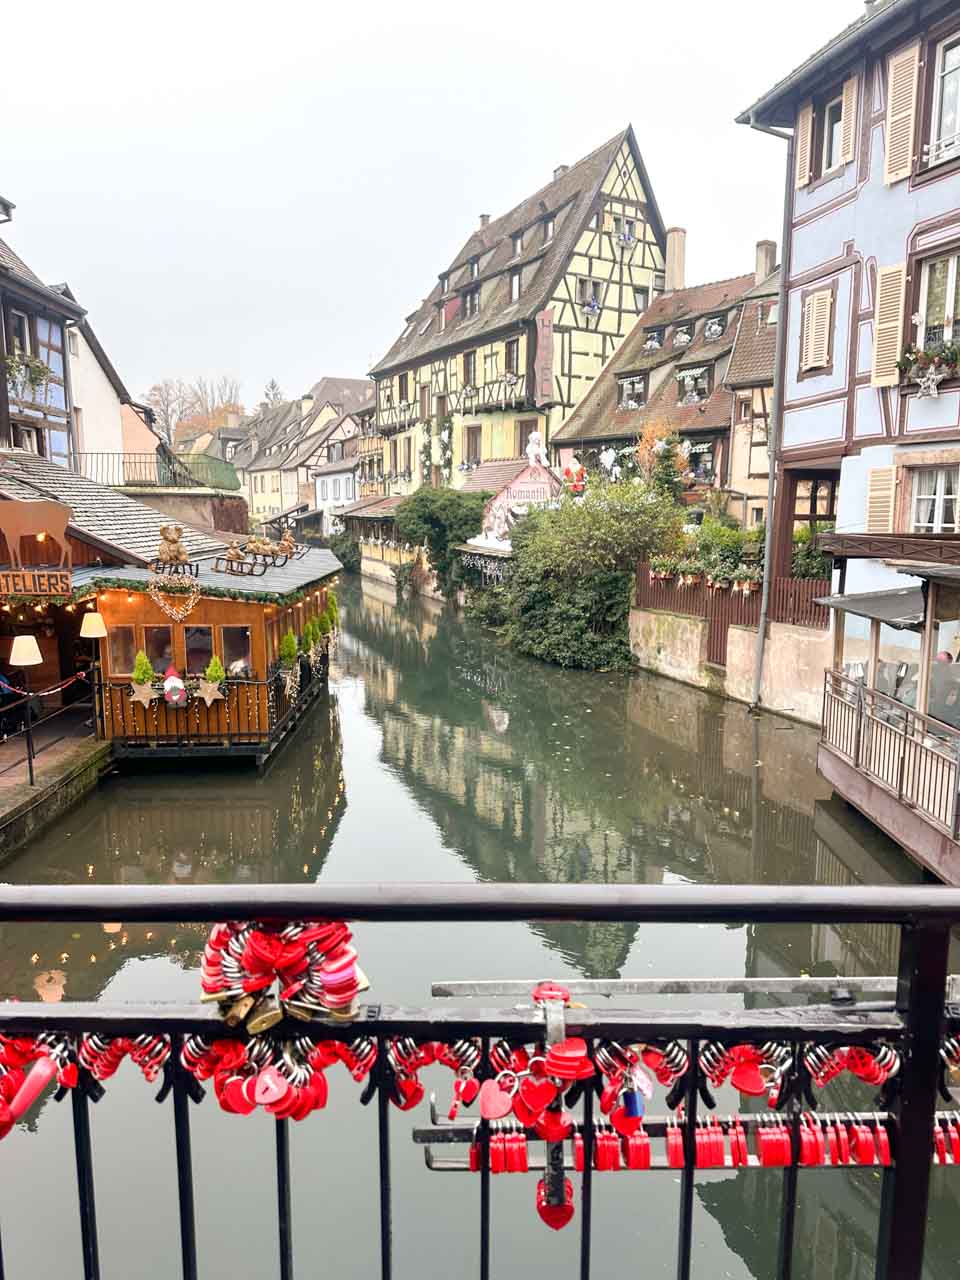 Half-timbered houses in the Petite Venise area of Colmar seen from a bridge